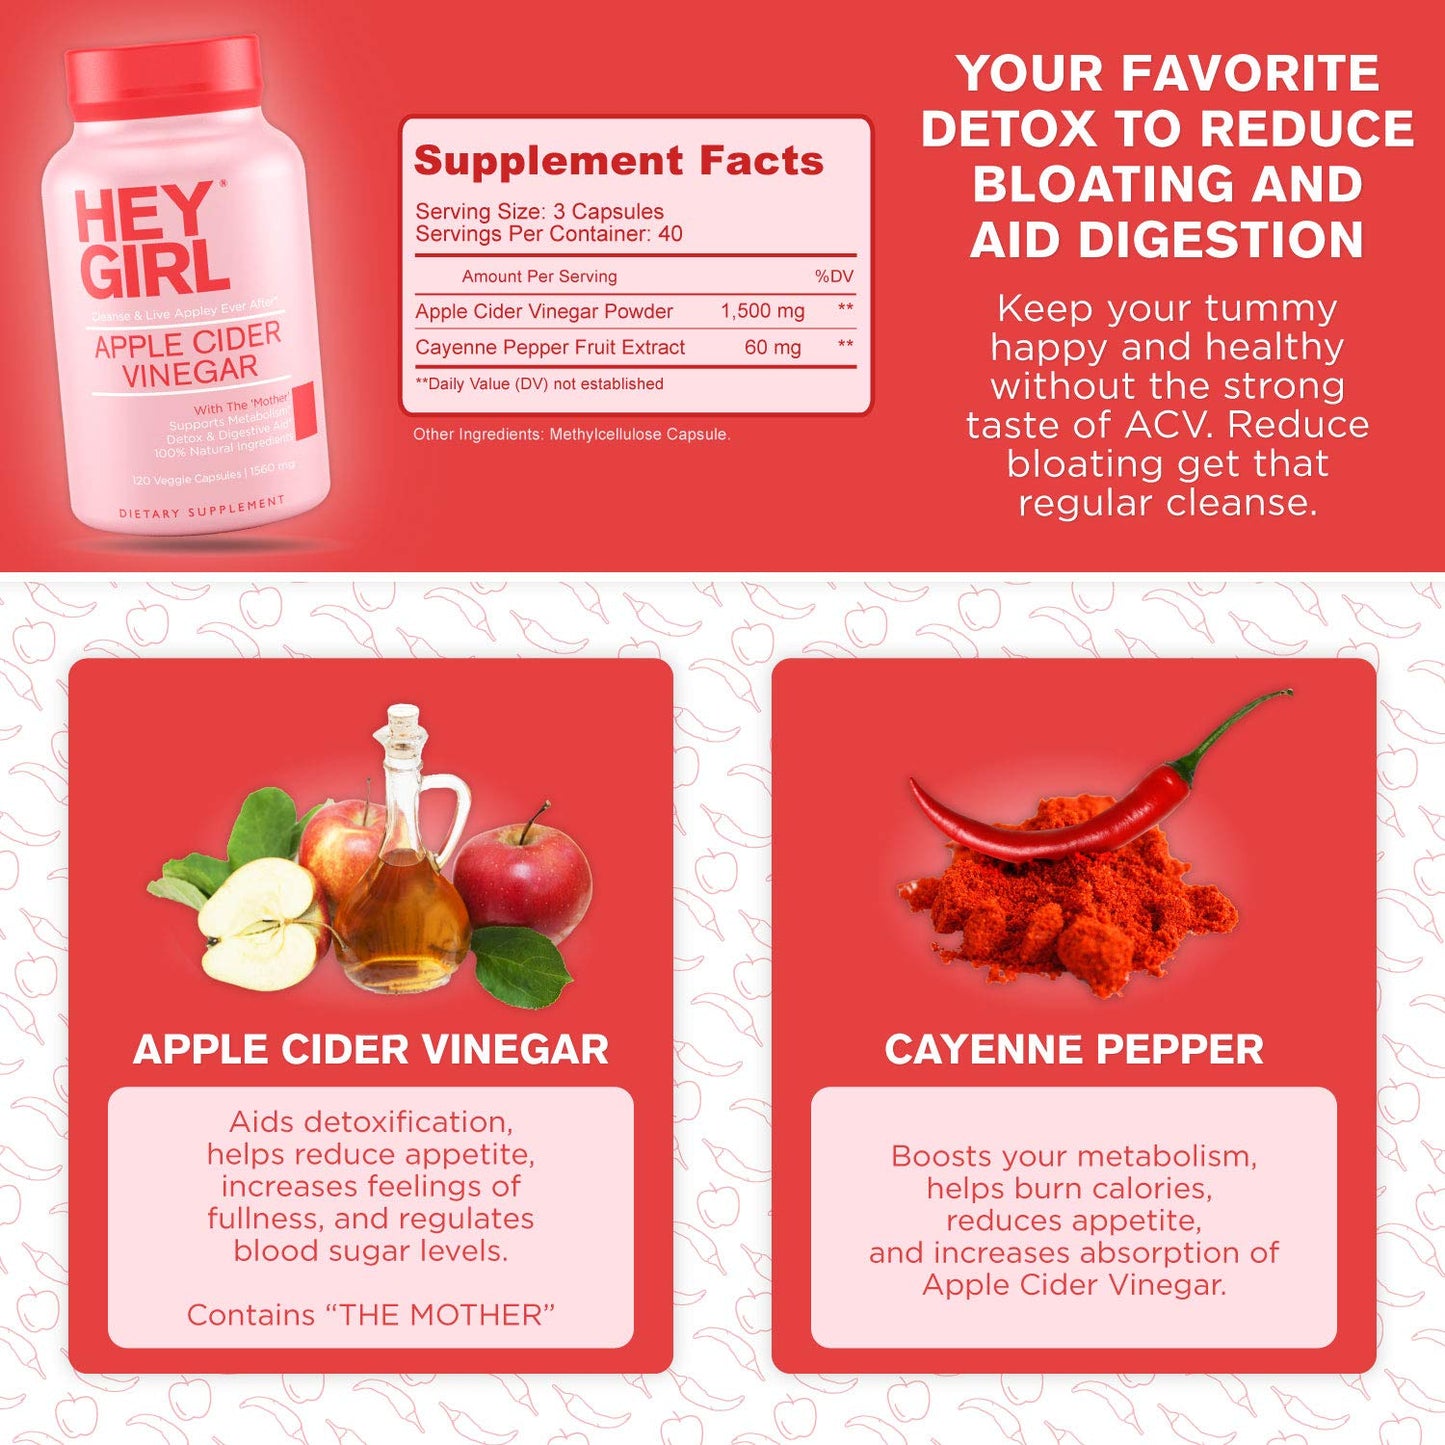 Apple Cider Vinegar Capsules with The Mother , 1560mg Apple Cider Vinegar Pills with Cayenne Pepper , 120 Vegan Acv Capsules for Detox Cleanse and Bloating